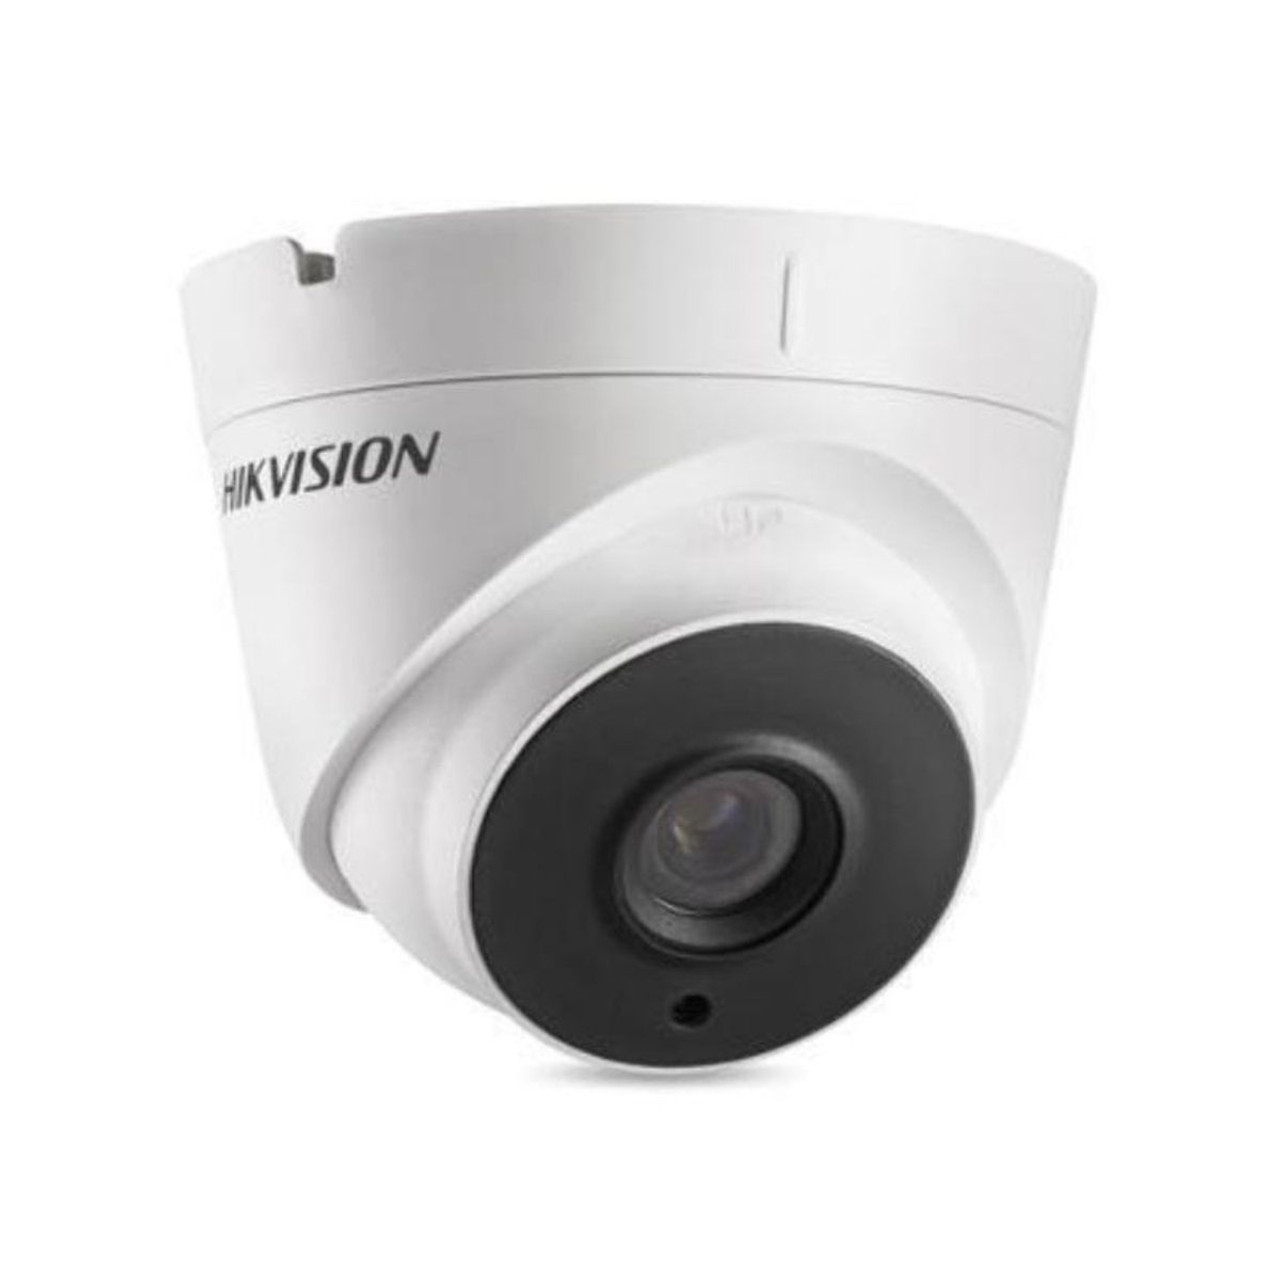 Hikvision® 3.6mm 3MP WDR EXIR Turret Camera, DS-2CE56F7T-IT3 product image